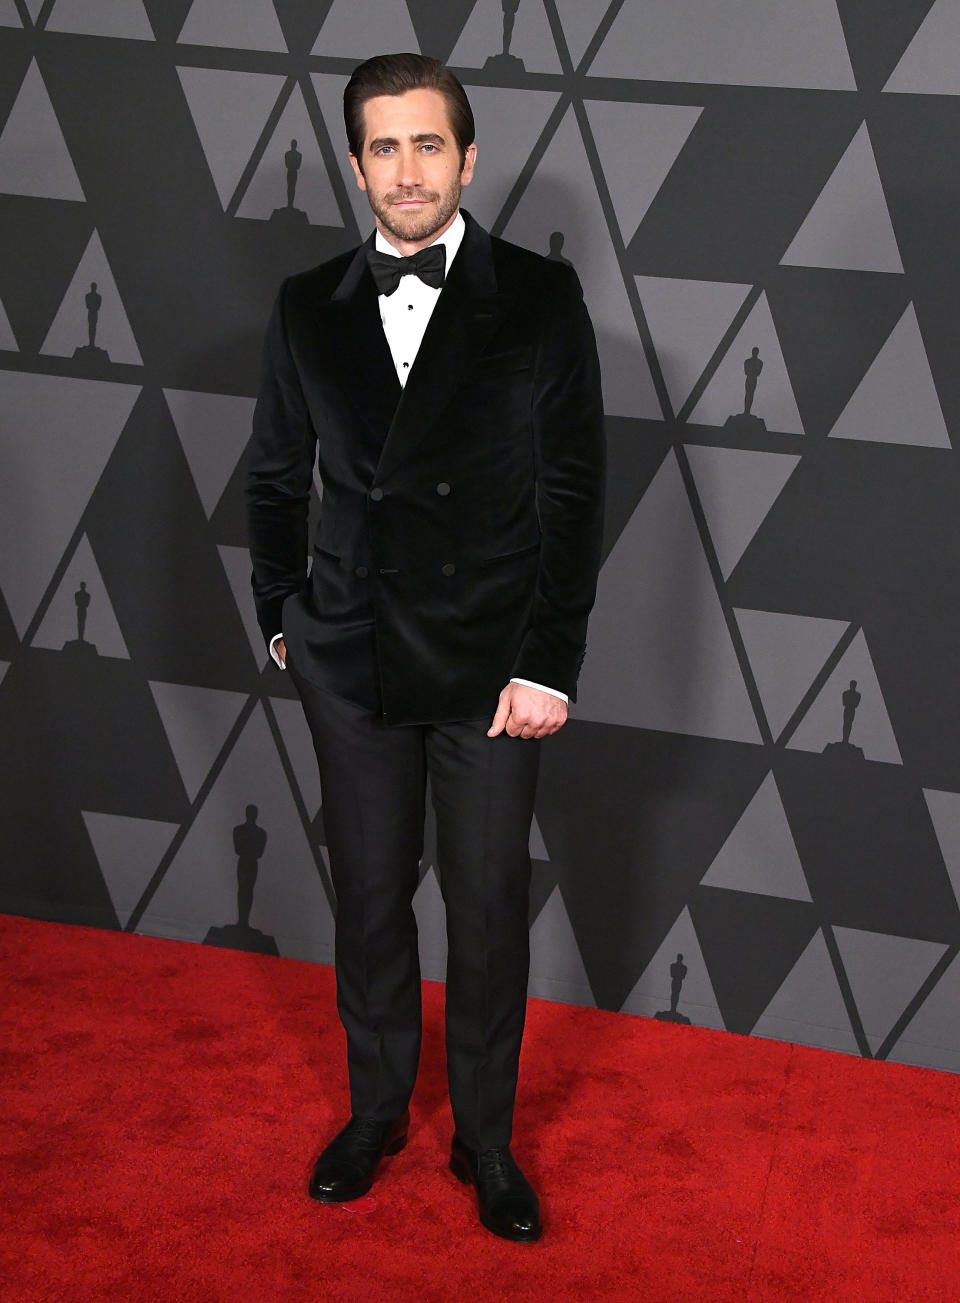 Jake Gyllenhaal at the Annual Governors Awards